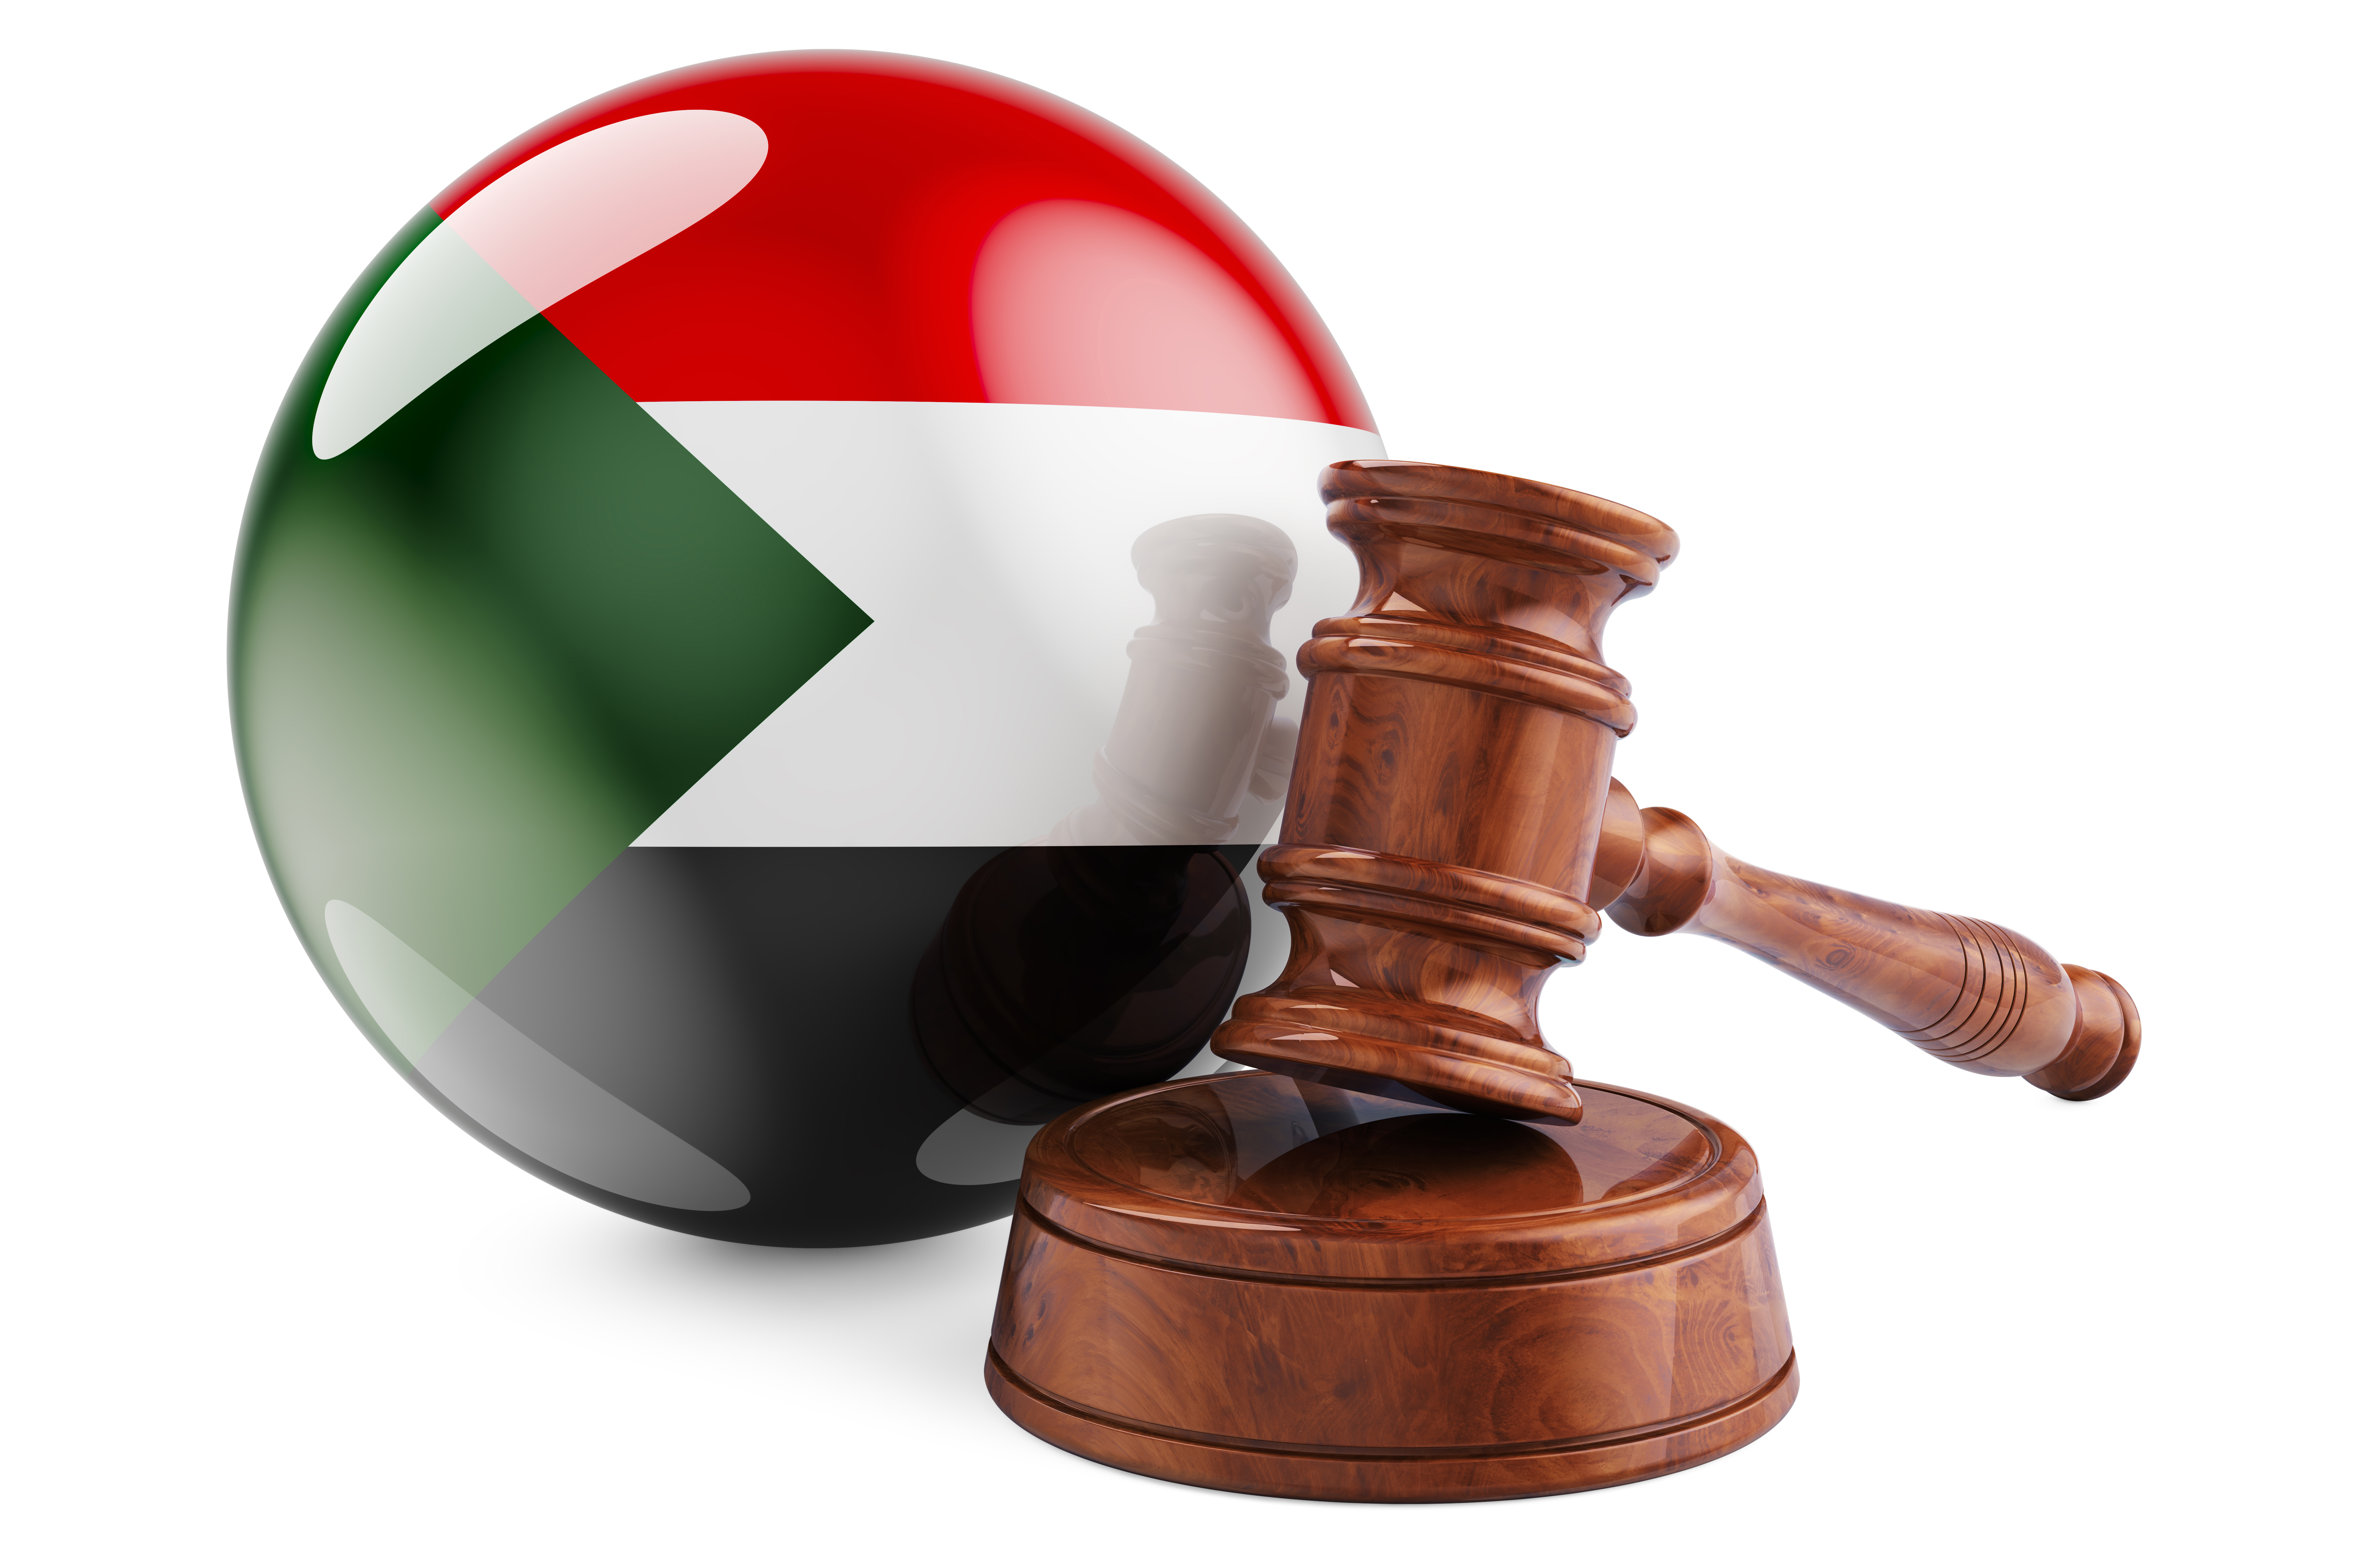 Owner’s Association Laws in the UAE